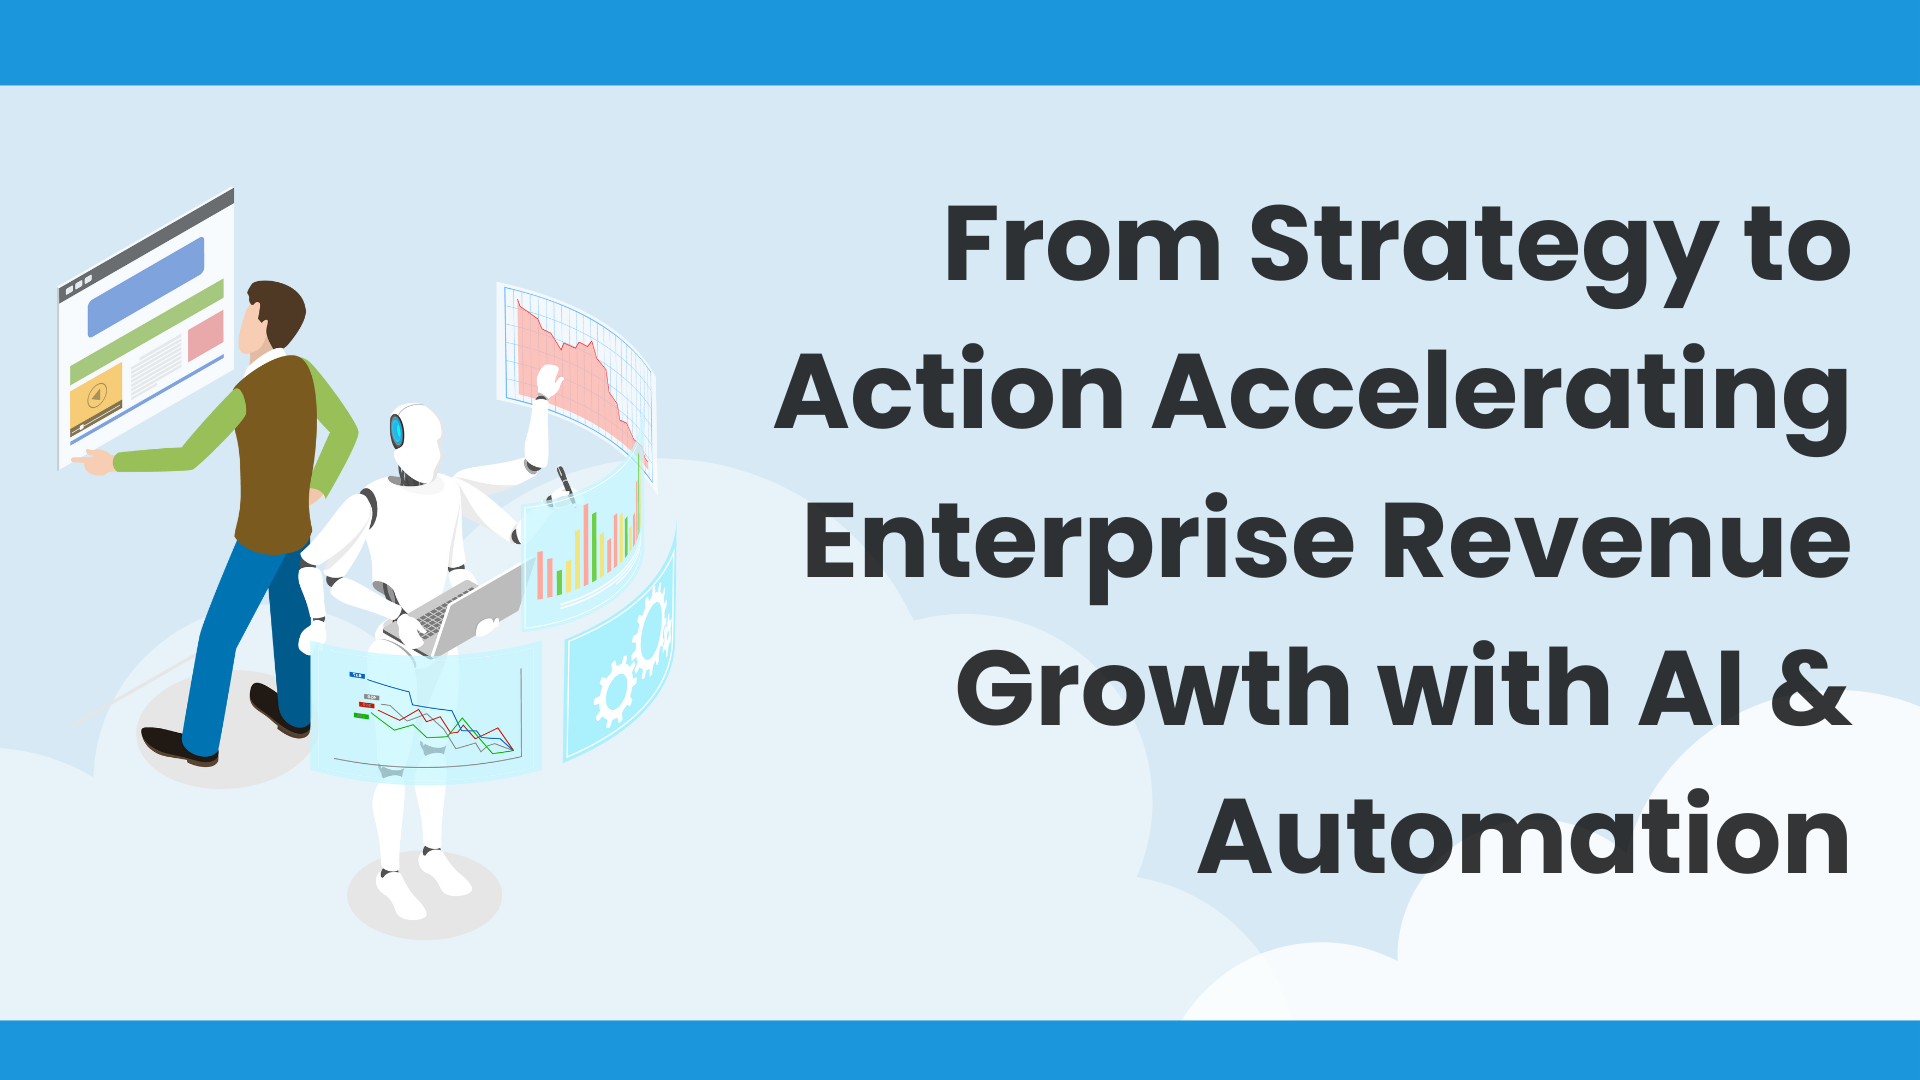 From Strategy to Action Accelerating Enterprise Revenue Growth with AI & Automation